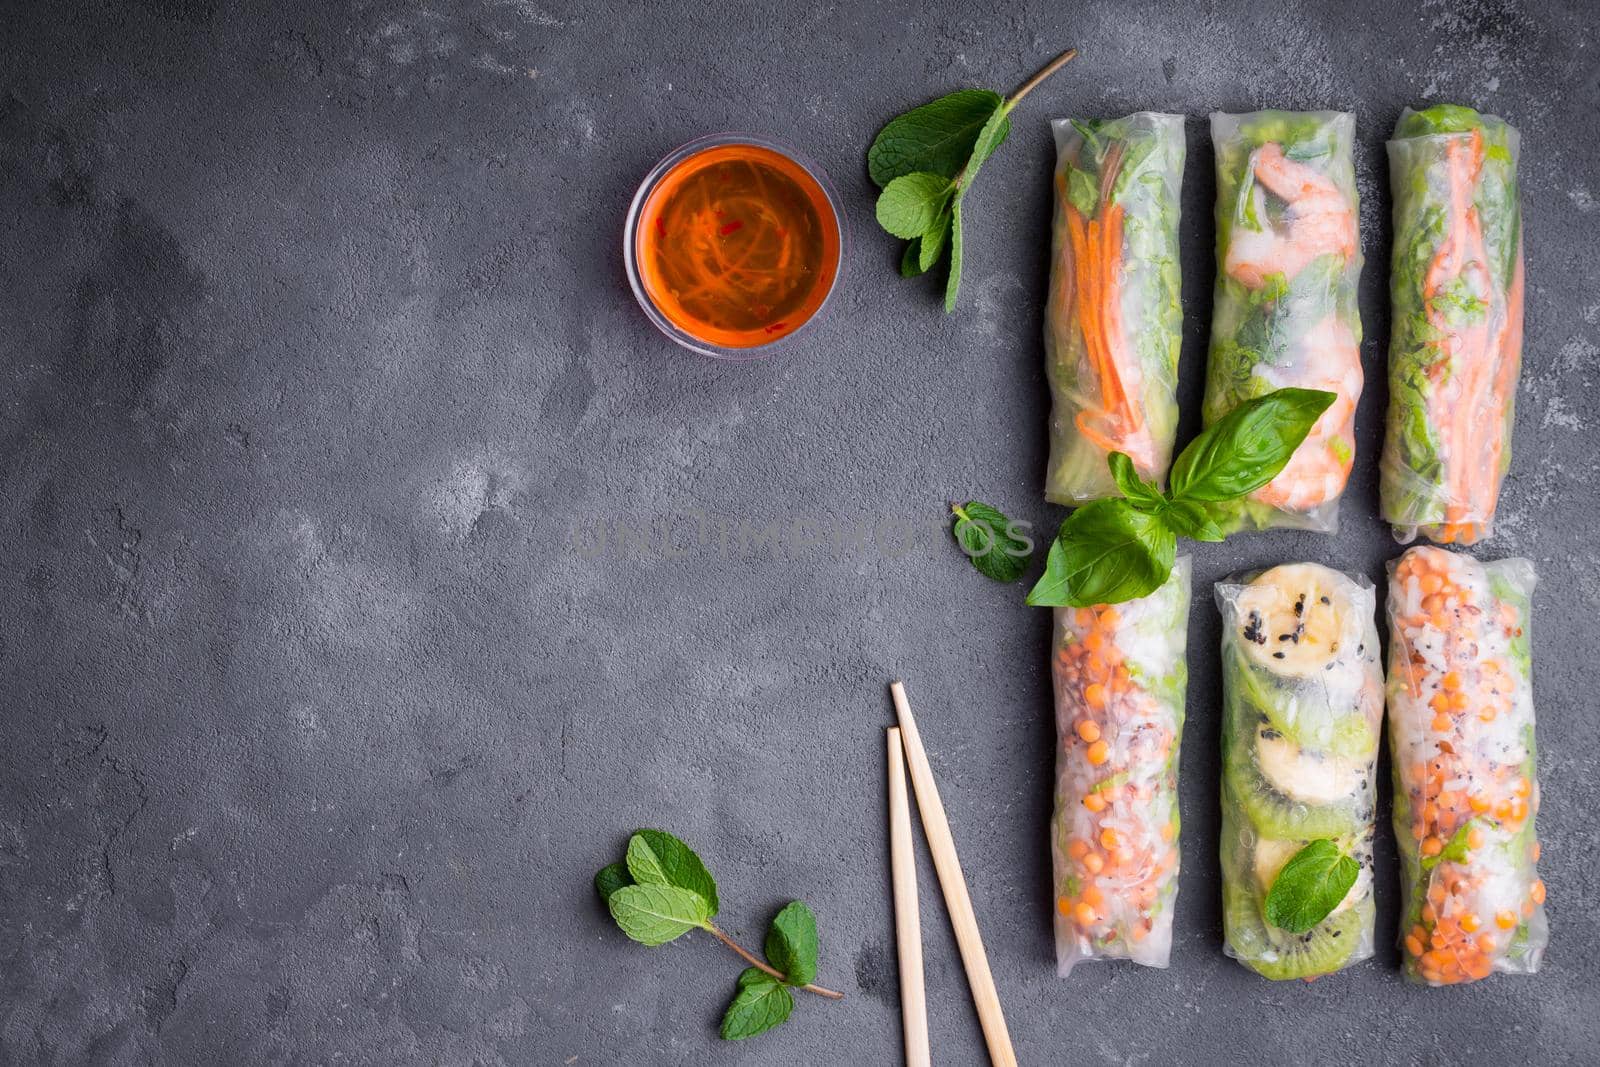 Fresh assorted spring rolls set background. Handmade asian/Chinese spring rolls, sauce, chopsticks. Rustic concrete background. Spring rolls with shrimps, vegetables, fruits. Space for text. Top view